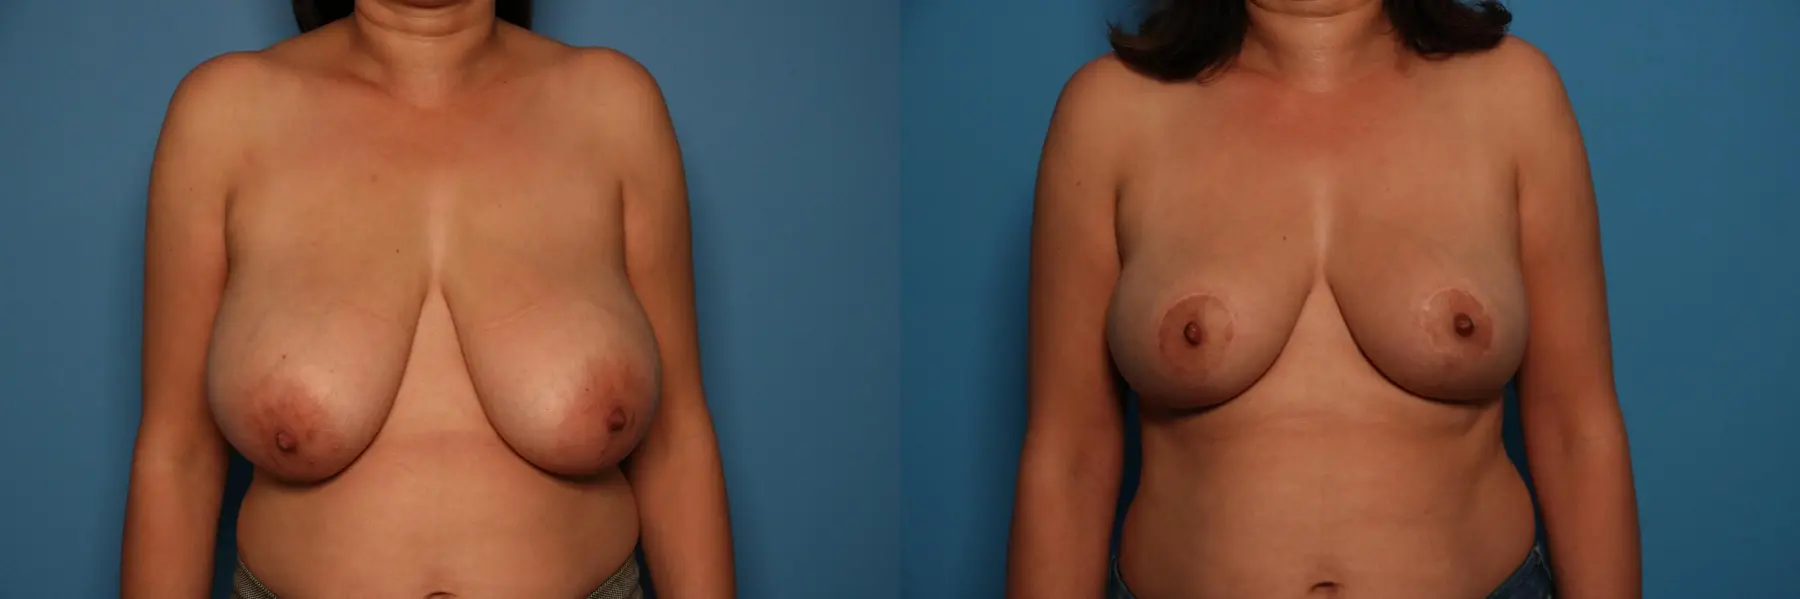 Breast Lift-Reduction: Patient 9 - Before and After  